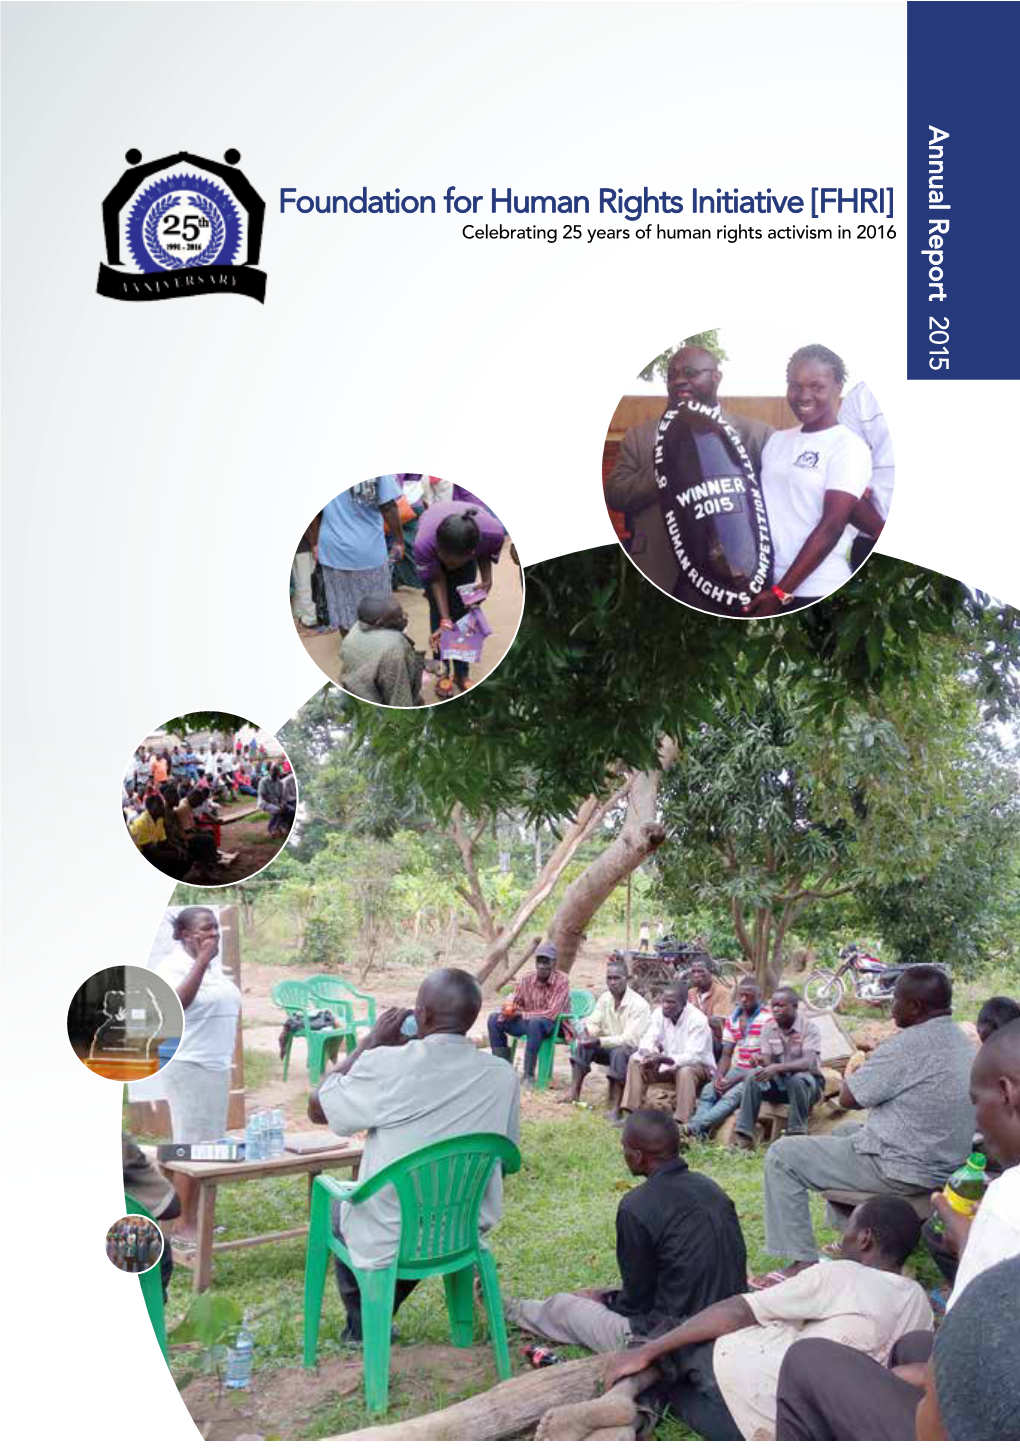 FHRI] Celebrating 25 Years of Human Rights Activism in 2016 2015 2015